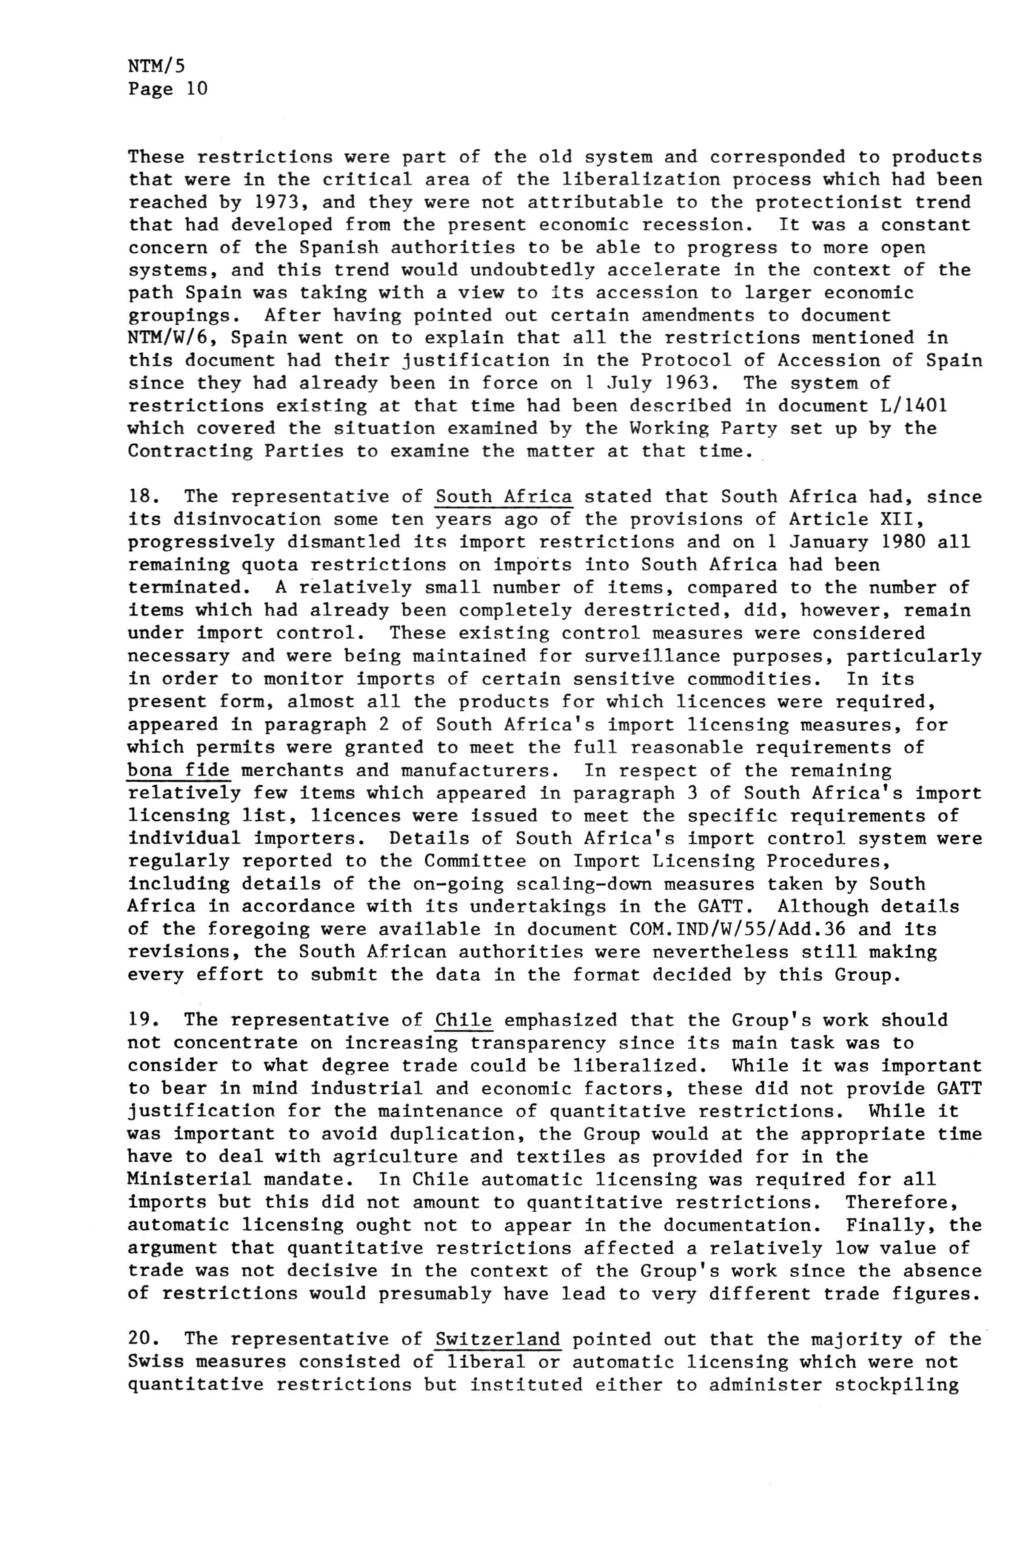 Page 10 These restrictions were part of the old system and corresponded to products that were in the critical area of the liberalization process which had been reached by 1973, and they were not